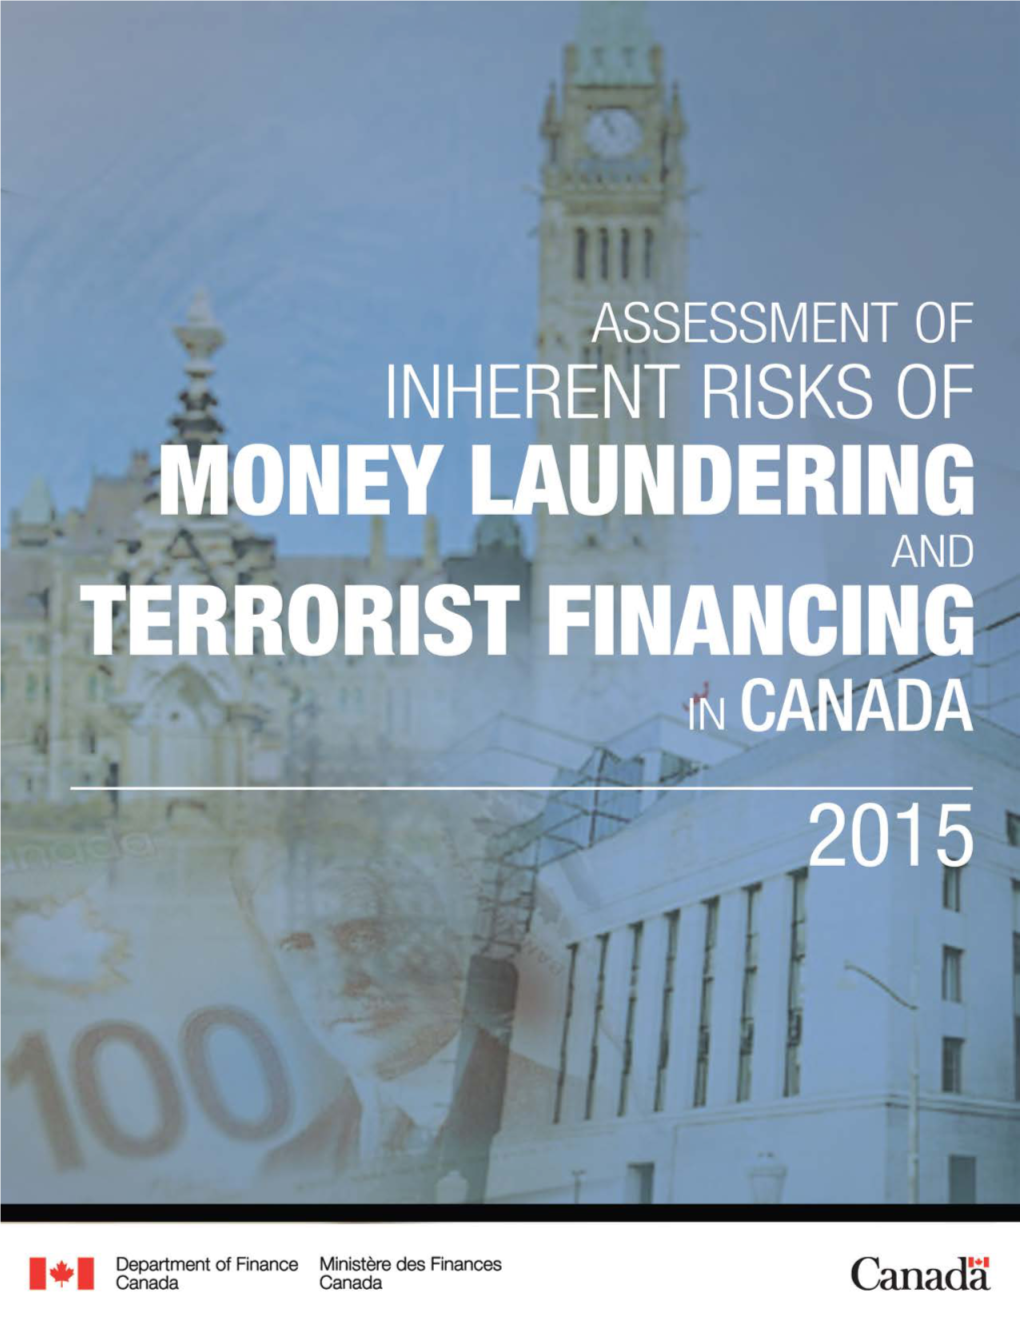 Assessment of Inherent Risks of Money Laundering and Terrorist Financing in Canada